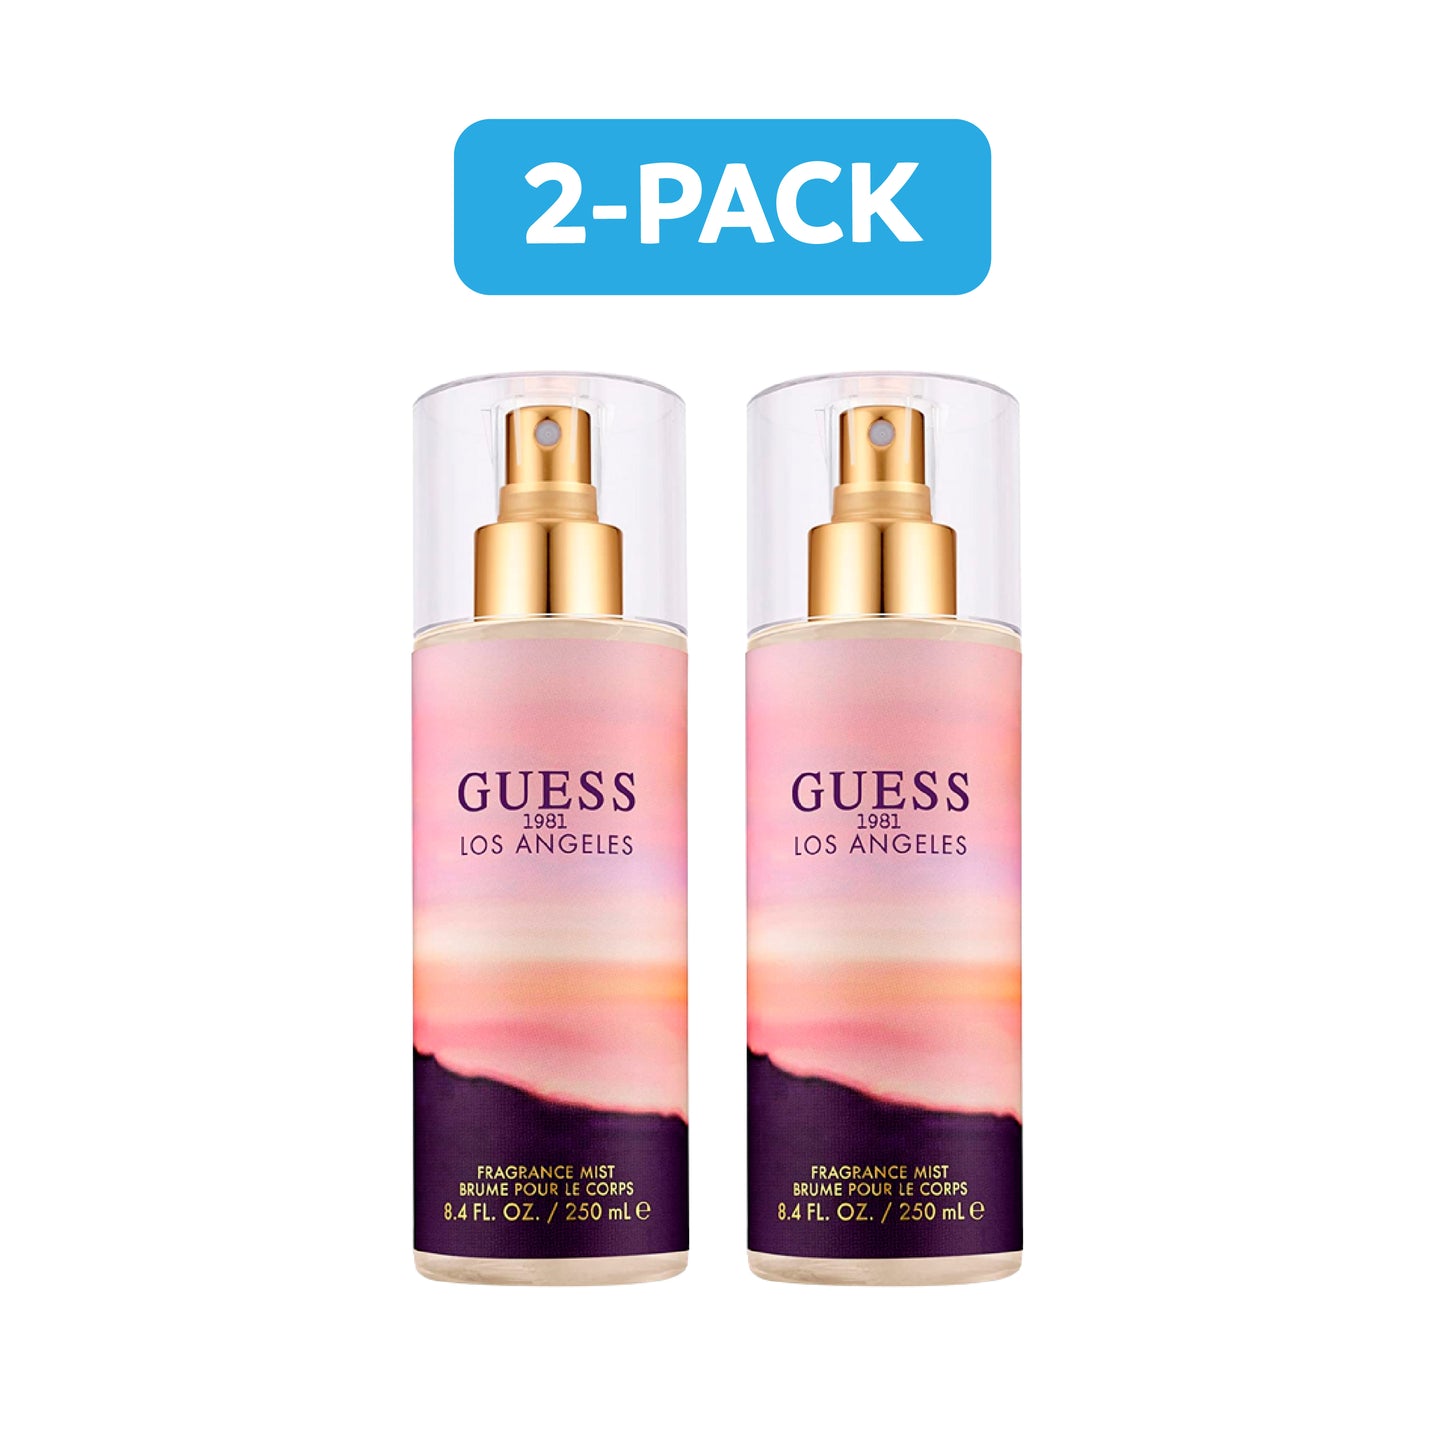 Guess 1981 Los Angeles Fragrance Mist for Women 8.4 oz 250 ml (2 Pack)